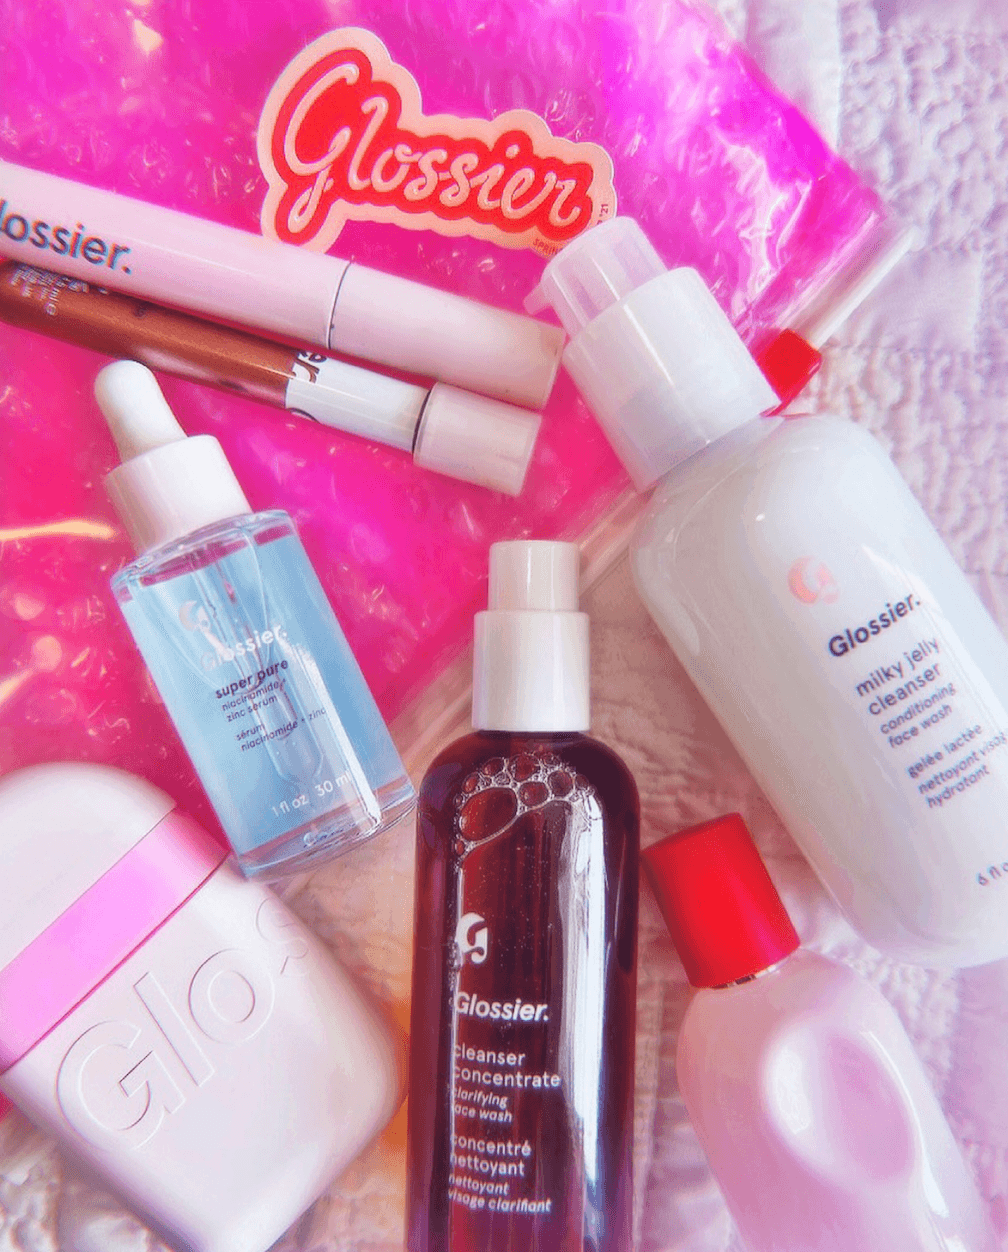 Image of seven Glossier Products laying out on pink packaging with a Glossier Sticker